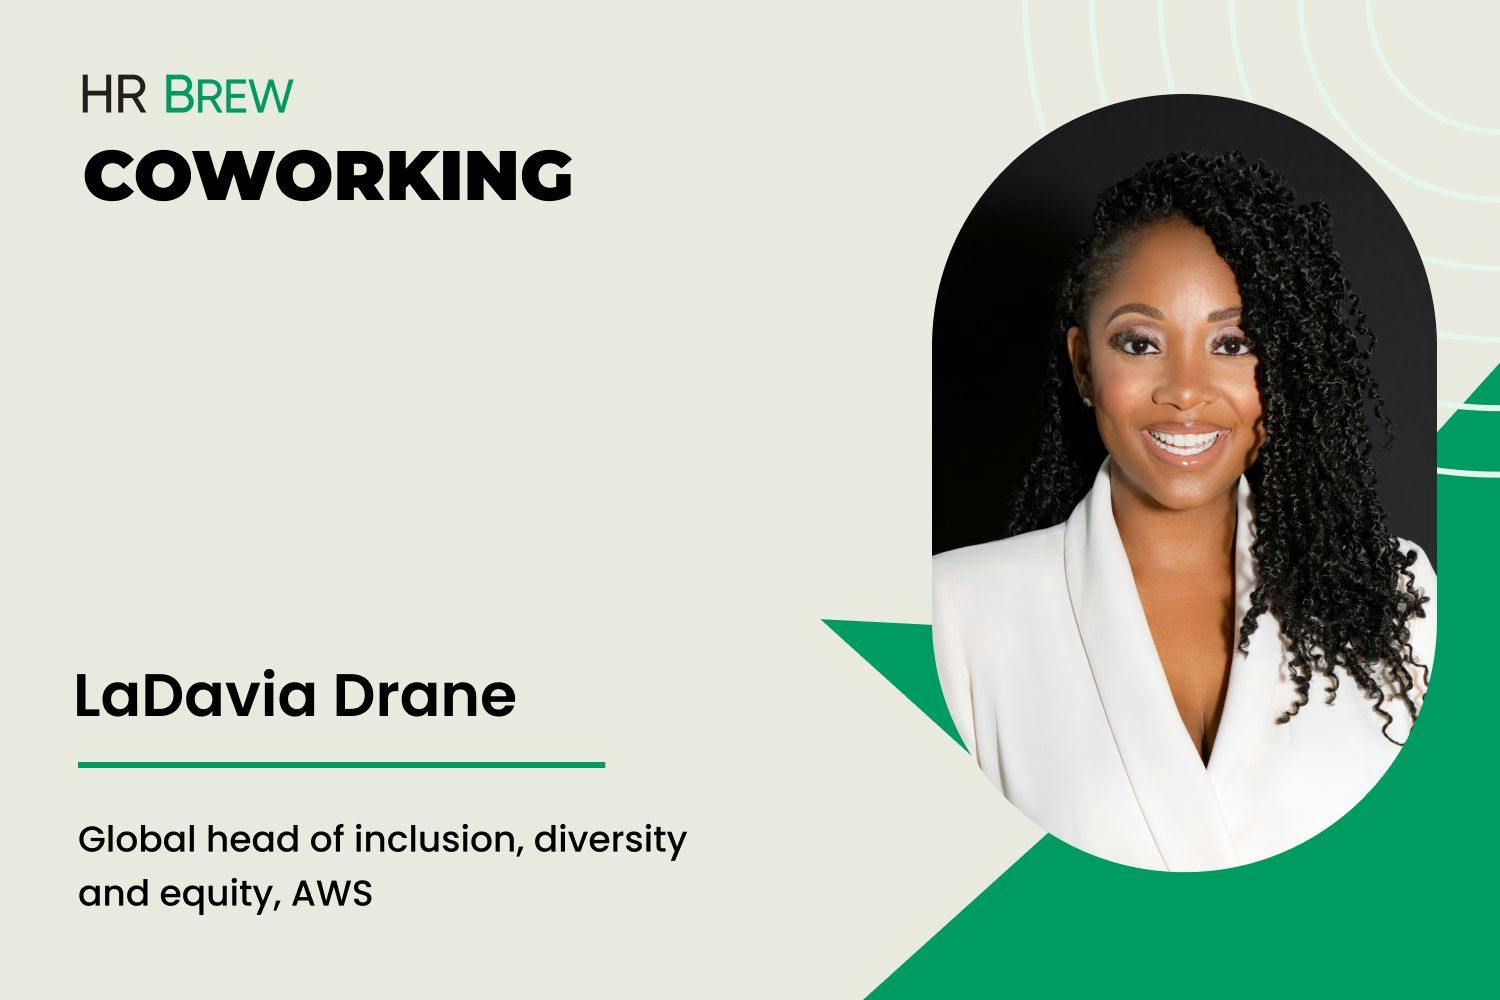 image that says HR Brew Coworking LaDavia Drane global head of inclusion, diversity, and equity, amazon web services next to an headshot of a woman in a white coat smiling